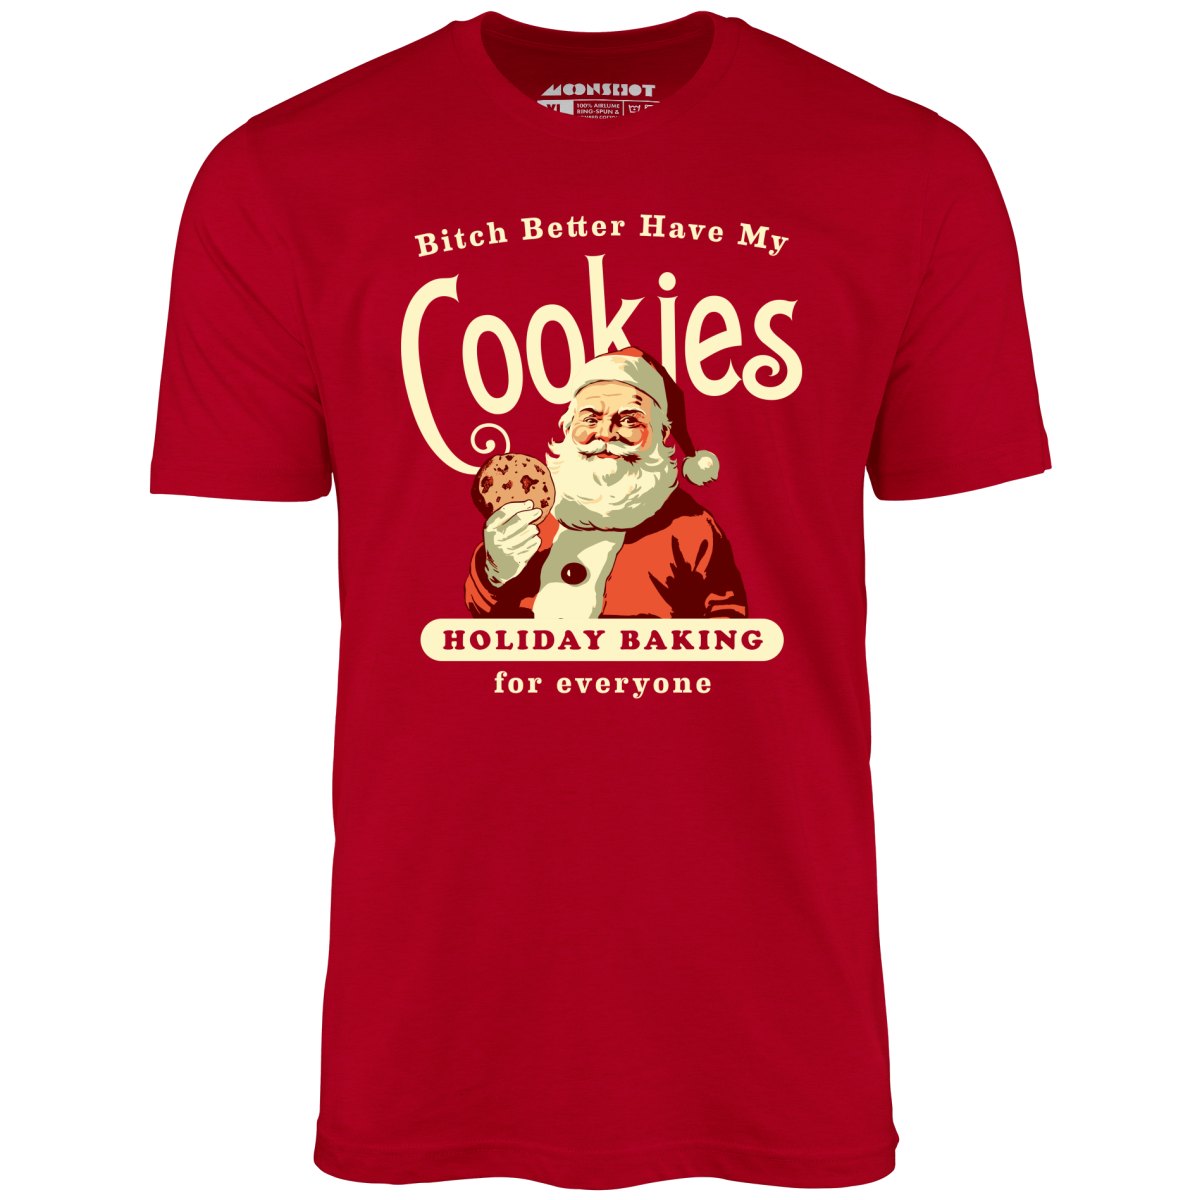 Bitch Better Have My Cookies Holiday Baking - Unisex T-Shirt